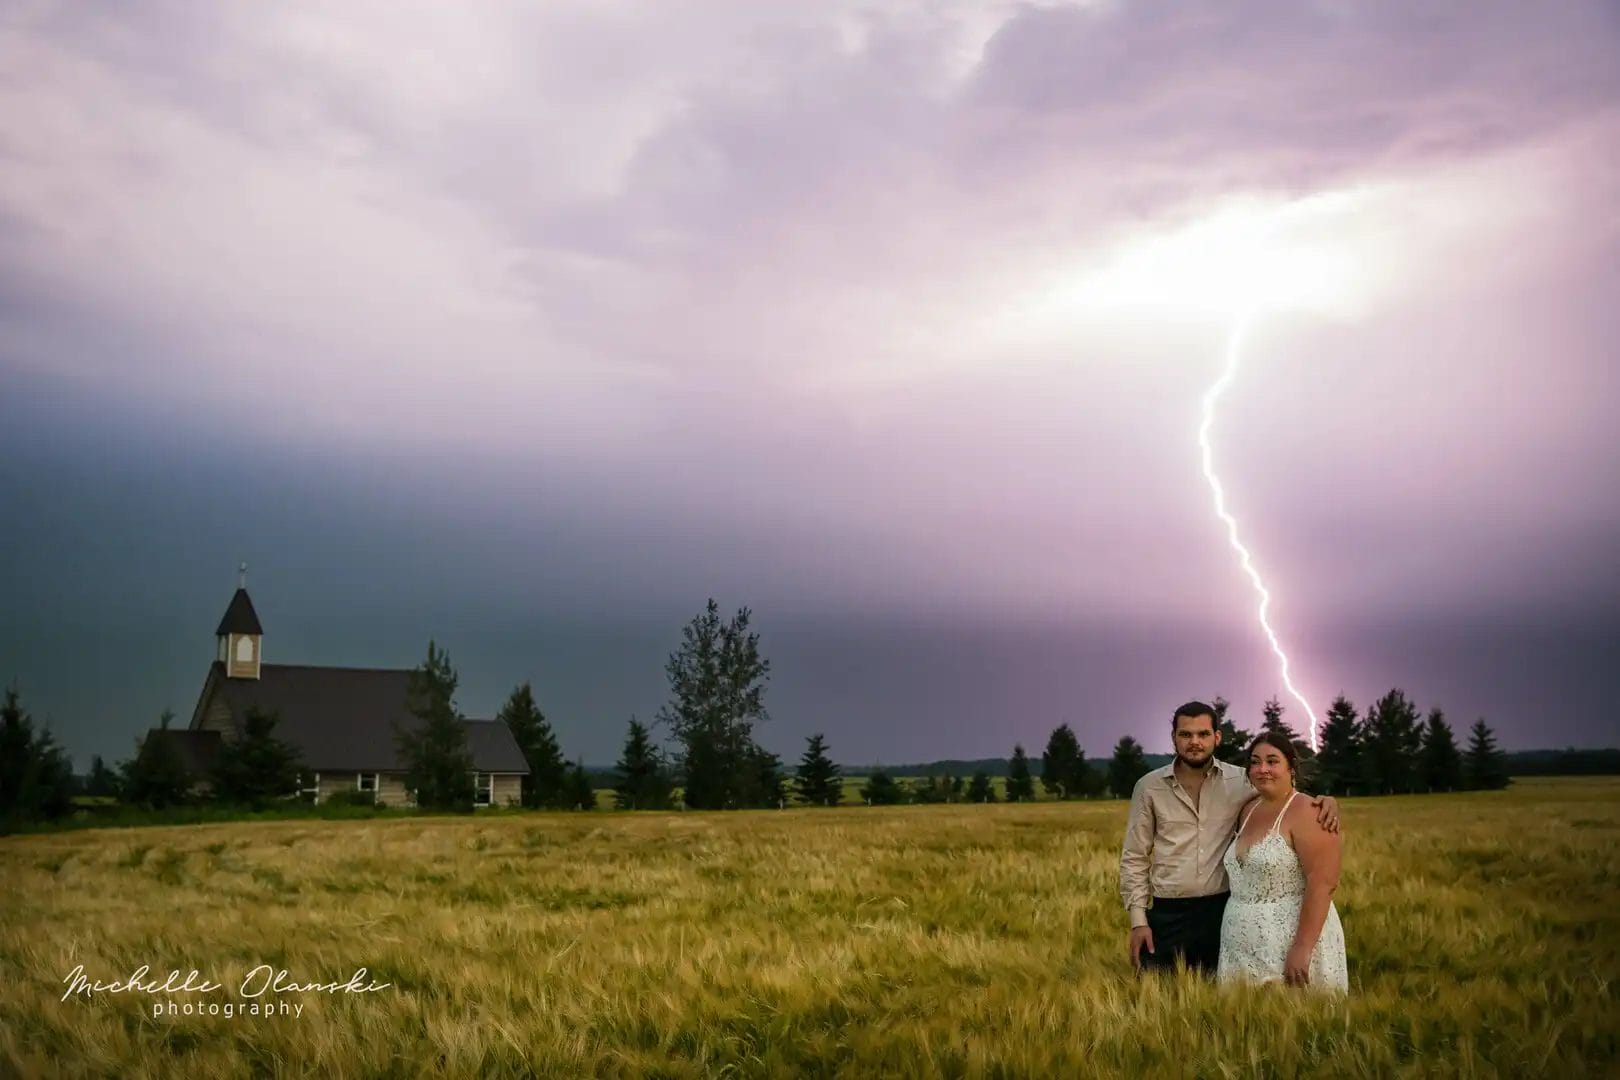 A couple stood in a field with a lighting strike behind them